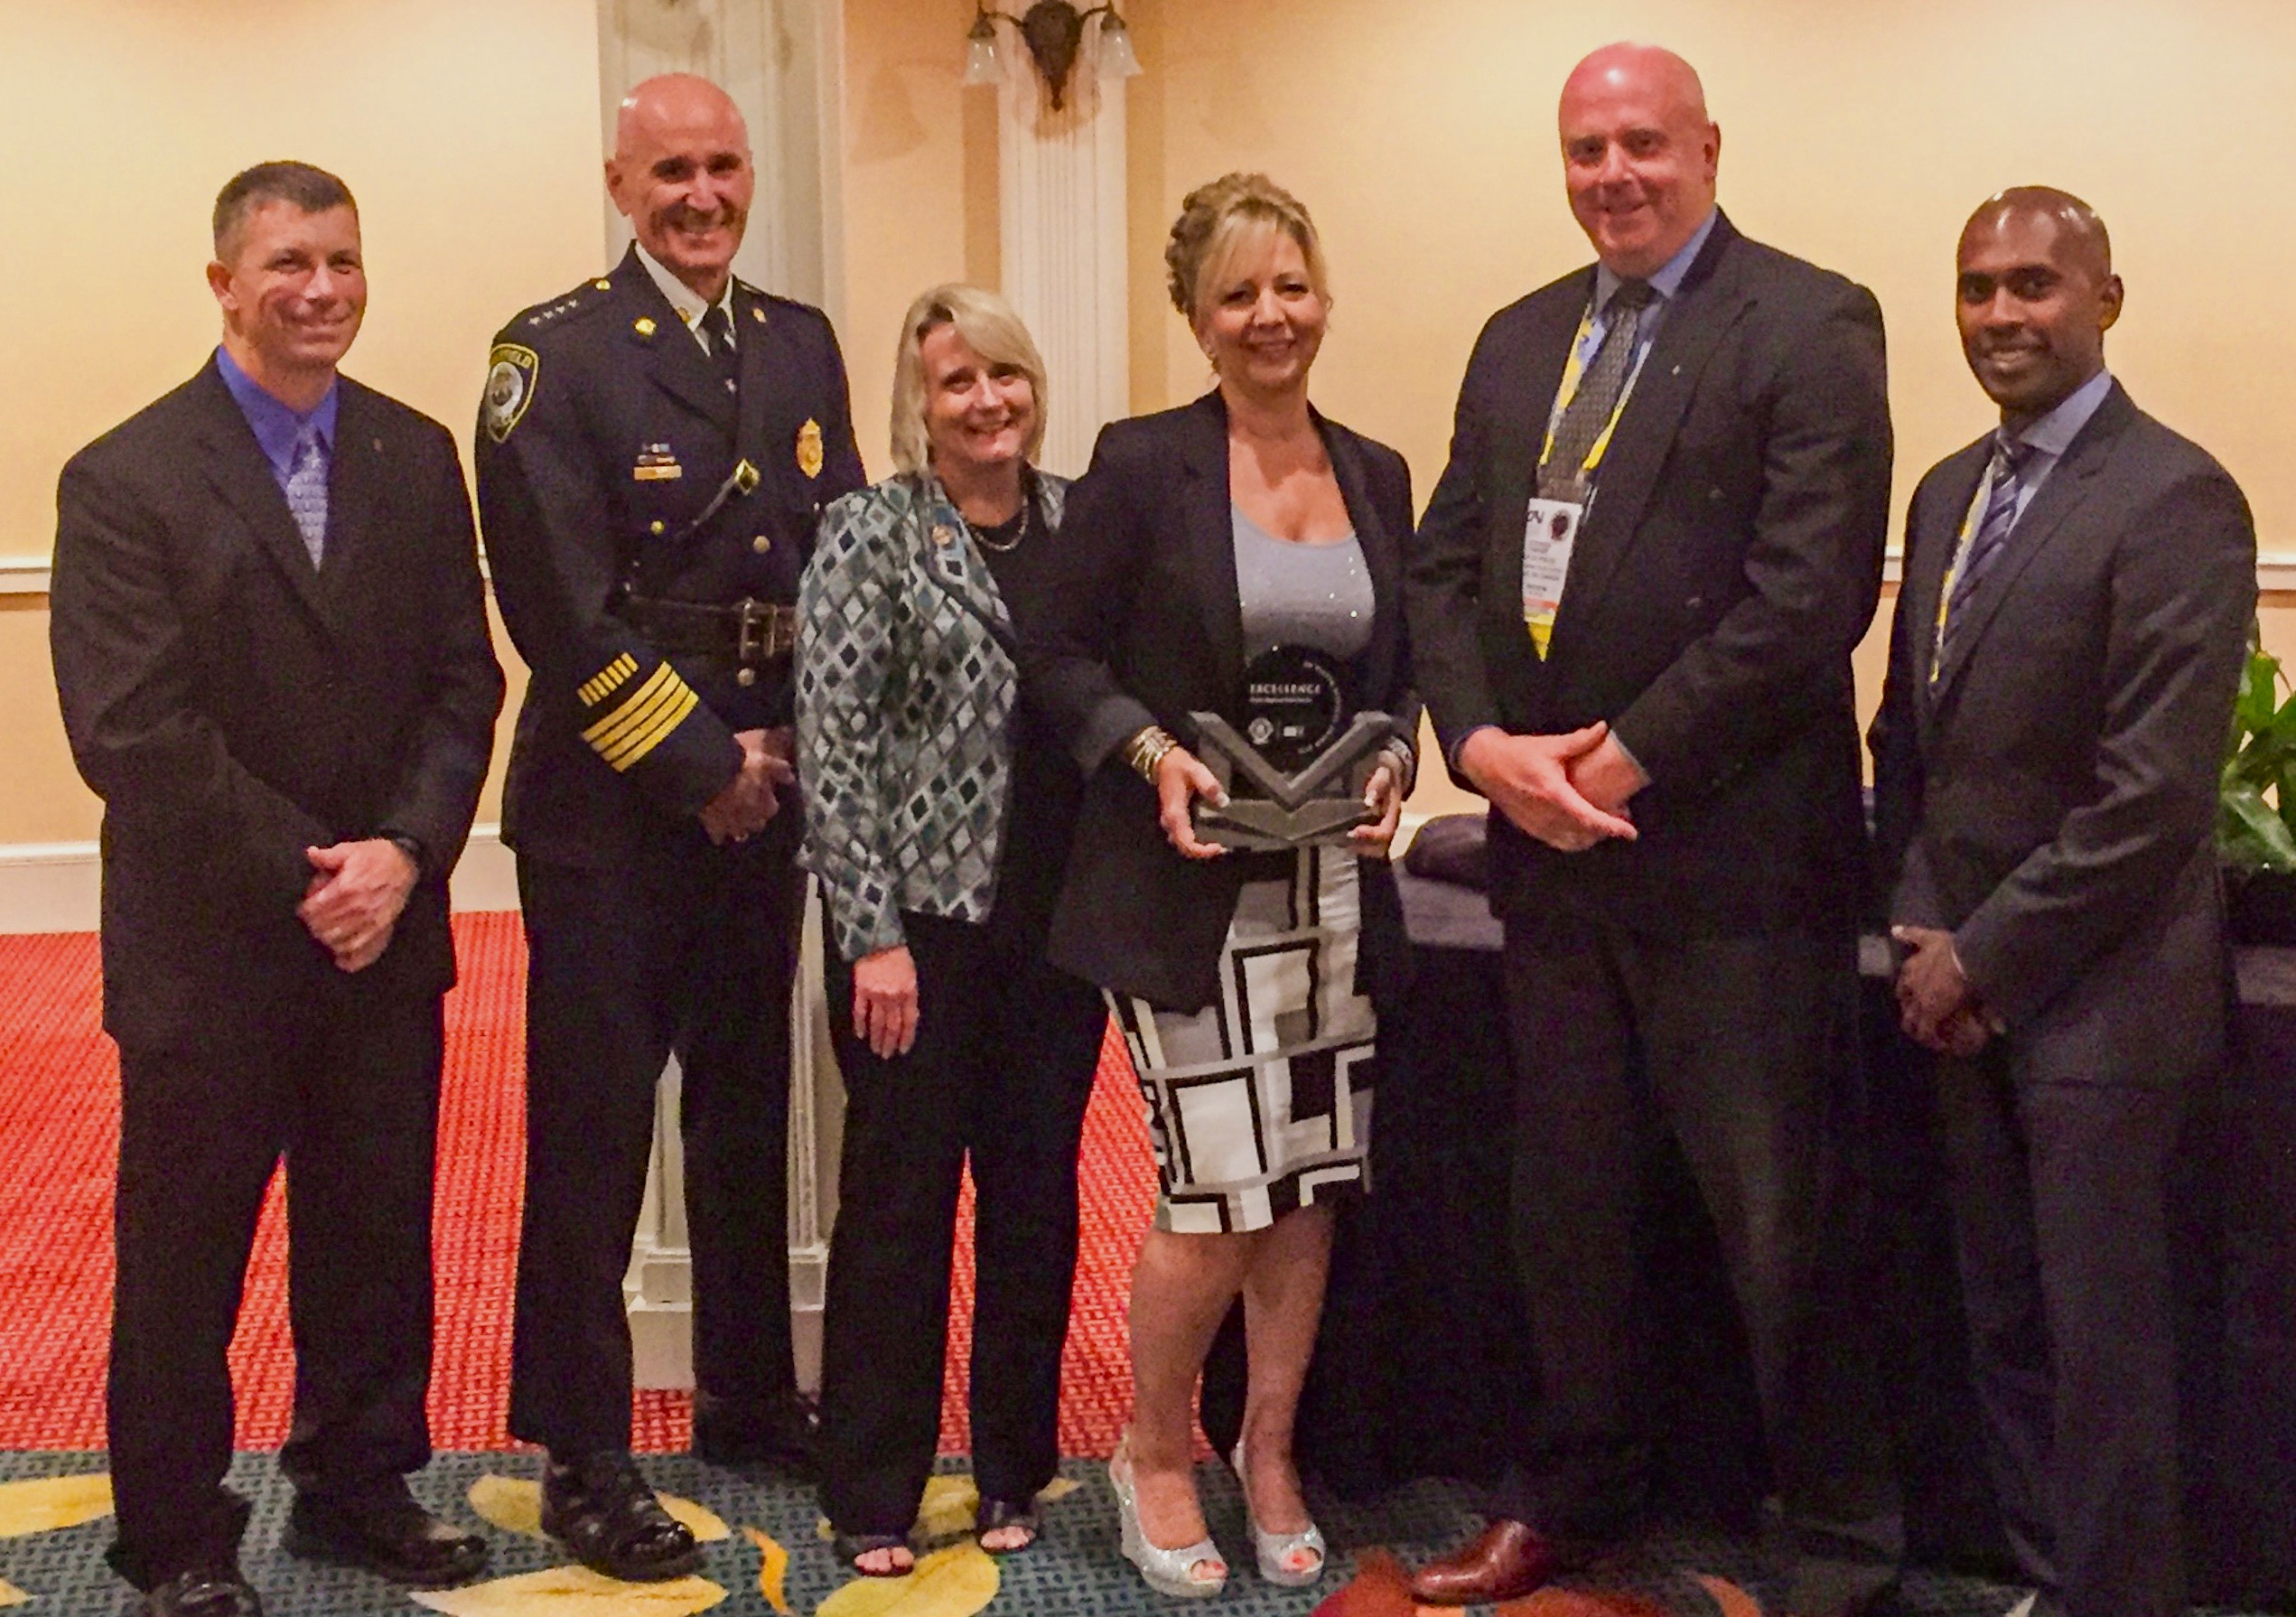 Award from International Association of Chiefs of Police/Login Inc. Presented at Conference in San Diego | HRPS